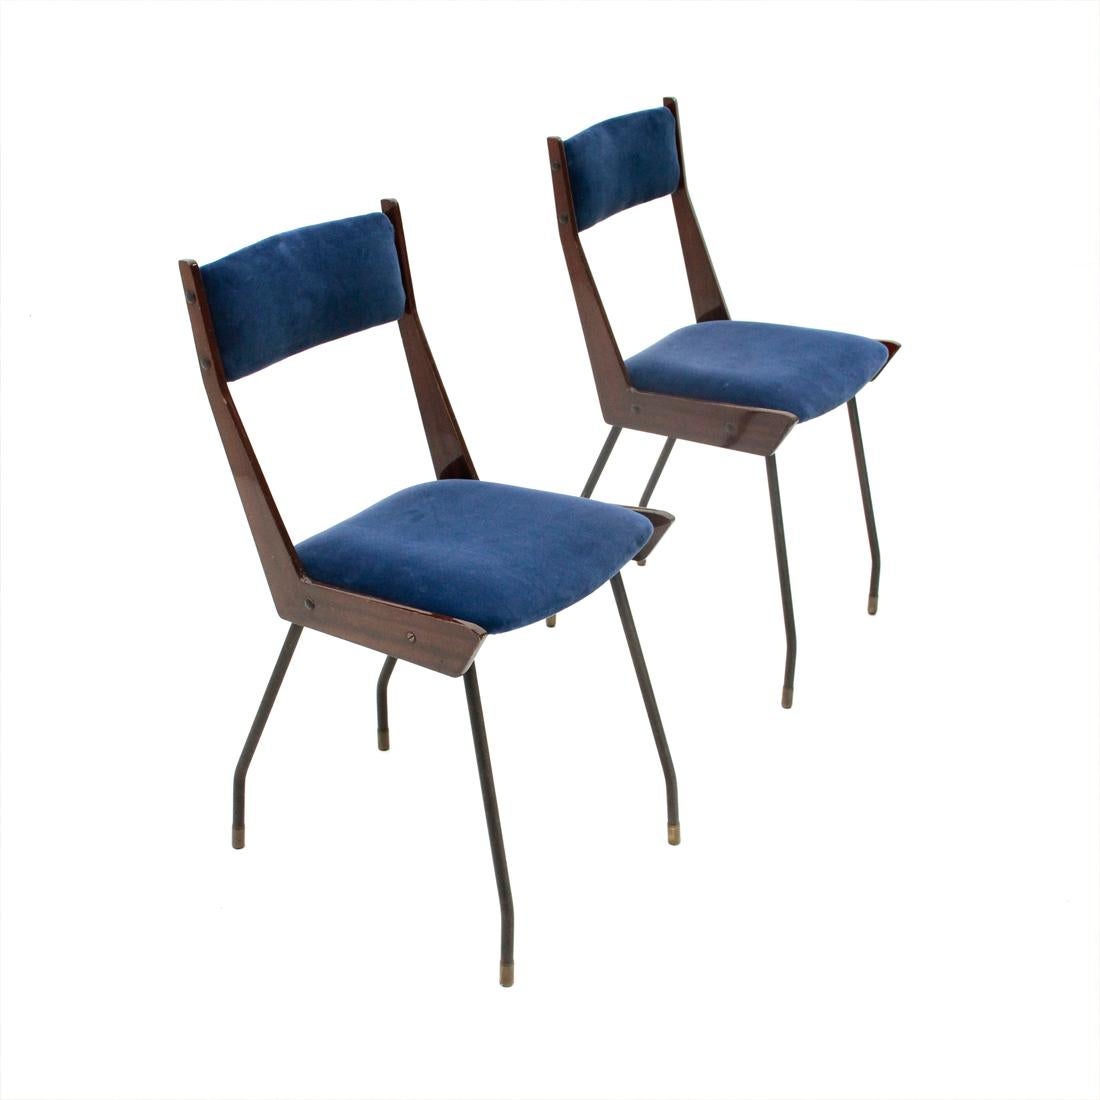 Pair of chairs produced in the 1950s by RB Rossana.
Seat and back in curved plywood padded and lined with new blue velvet fabric.
Side structure in lacquered wood.
Legs in black painted metal with brass terminals.
Good general condition, some